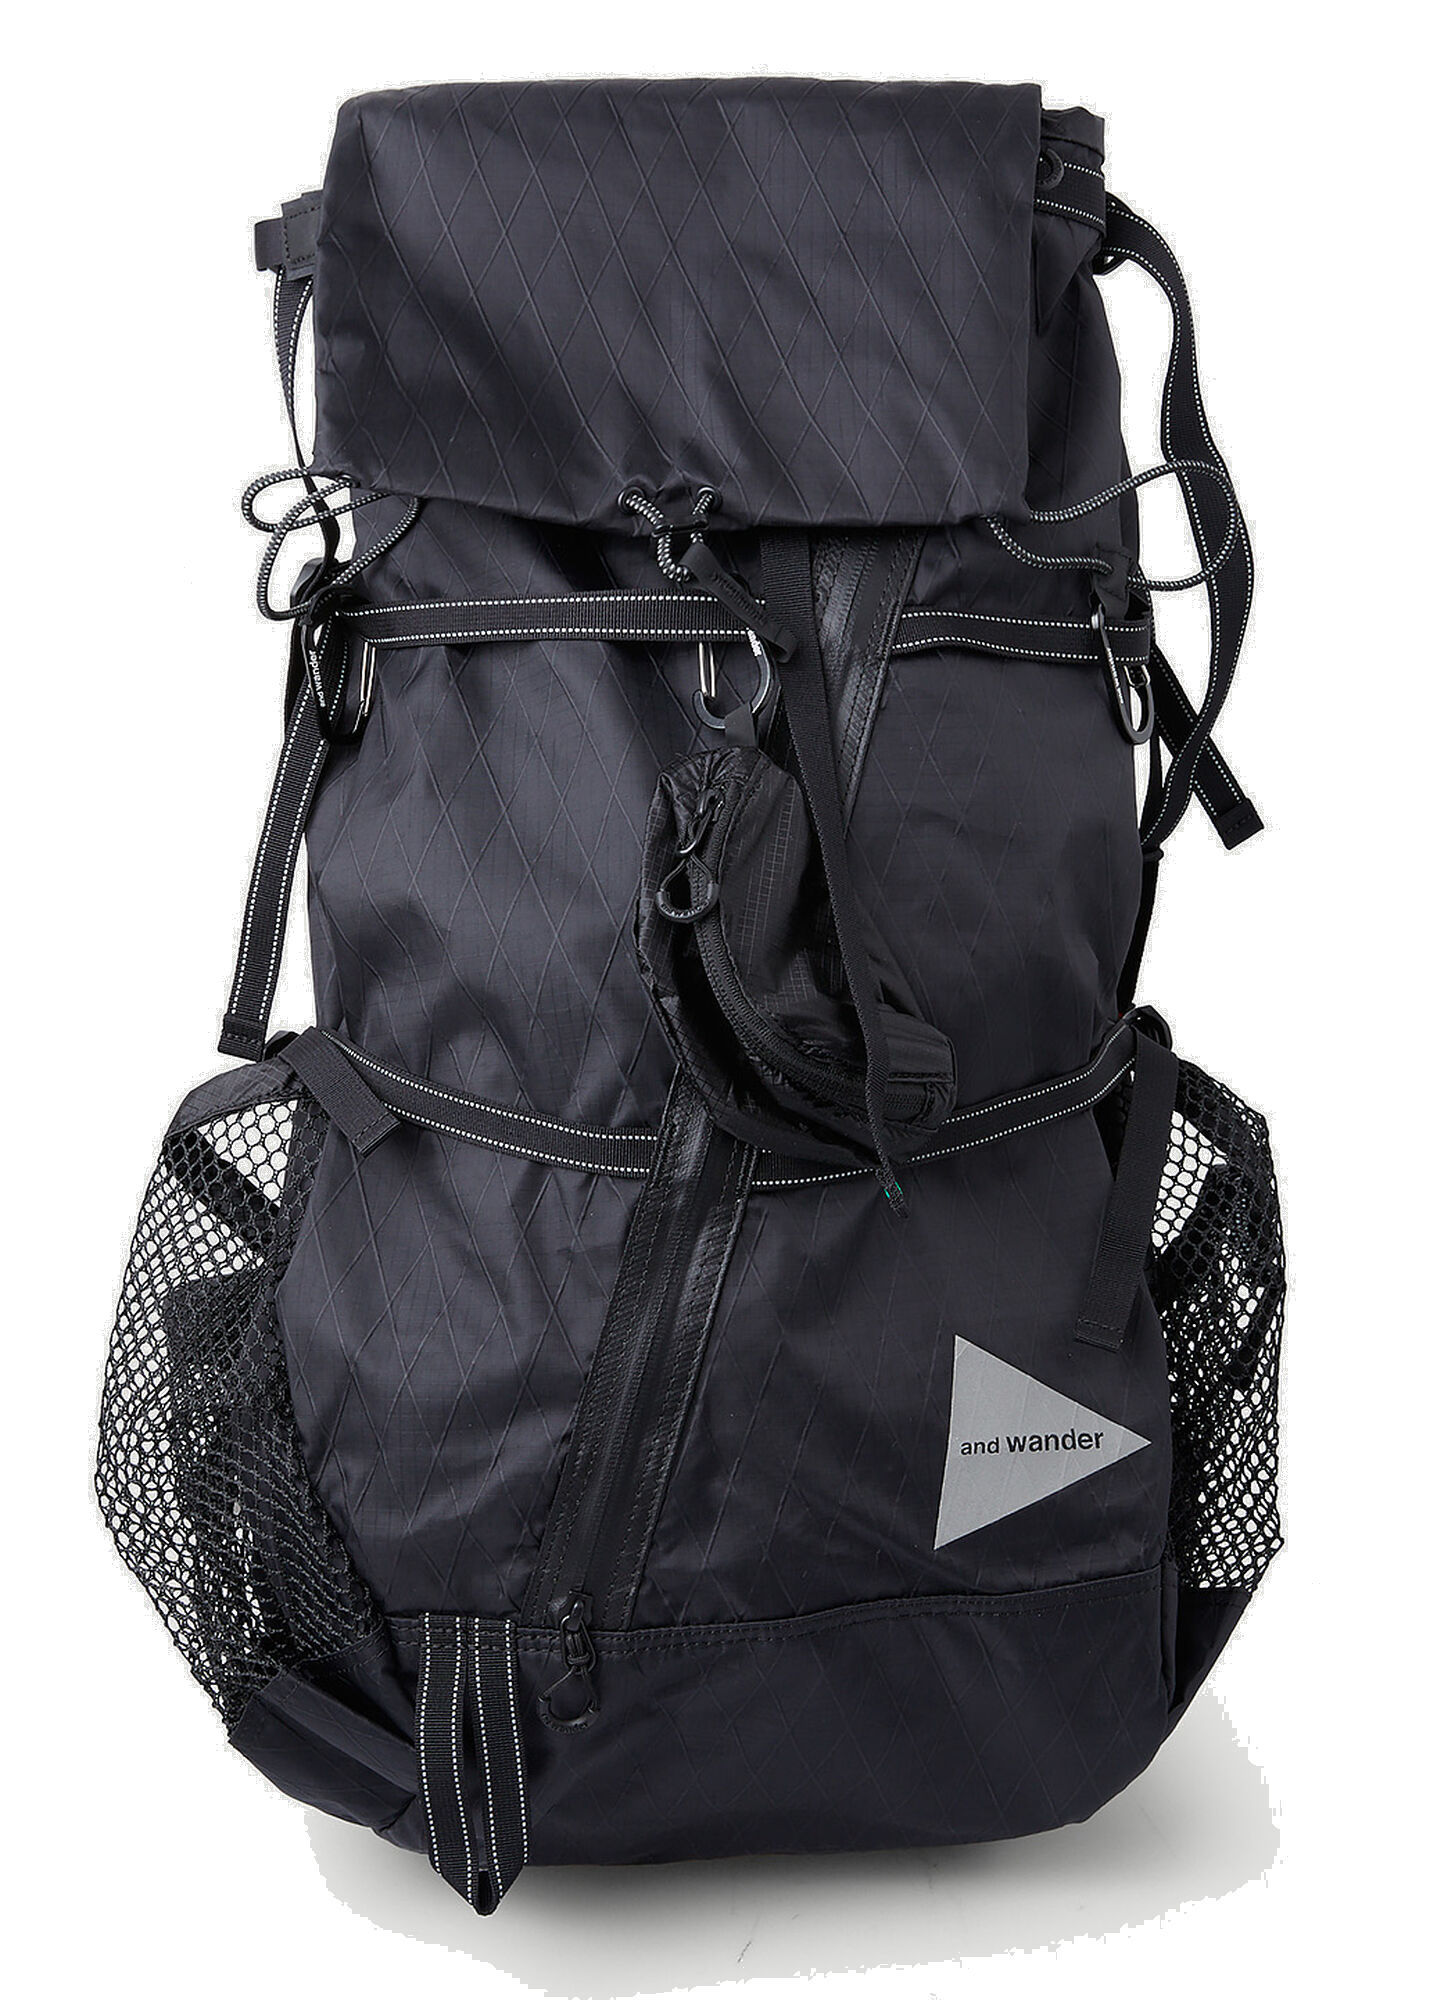 X-Pac 40L Backpack in Black and Wander